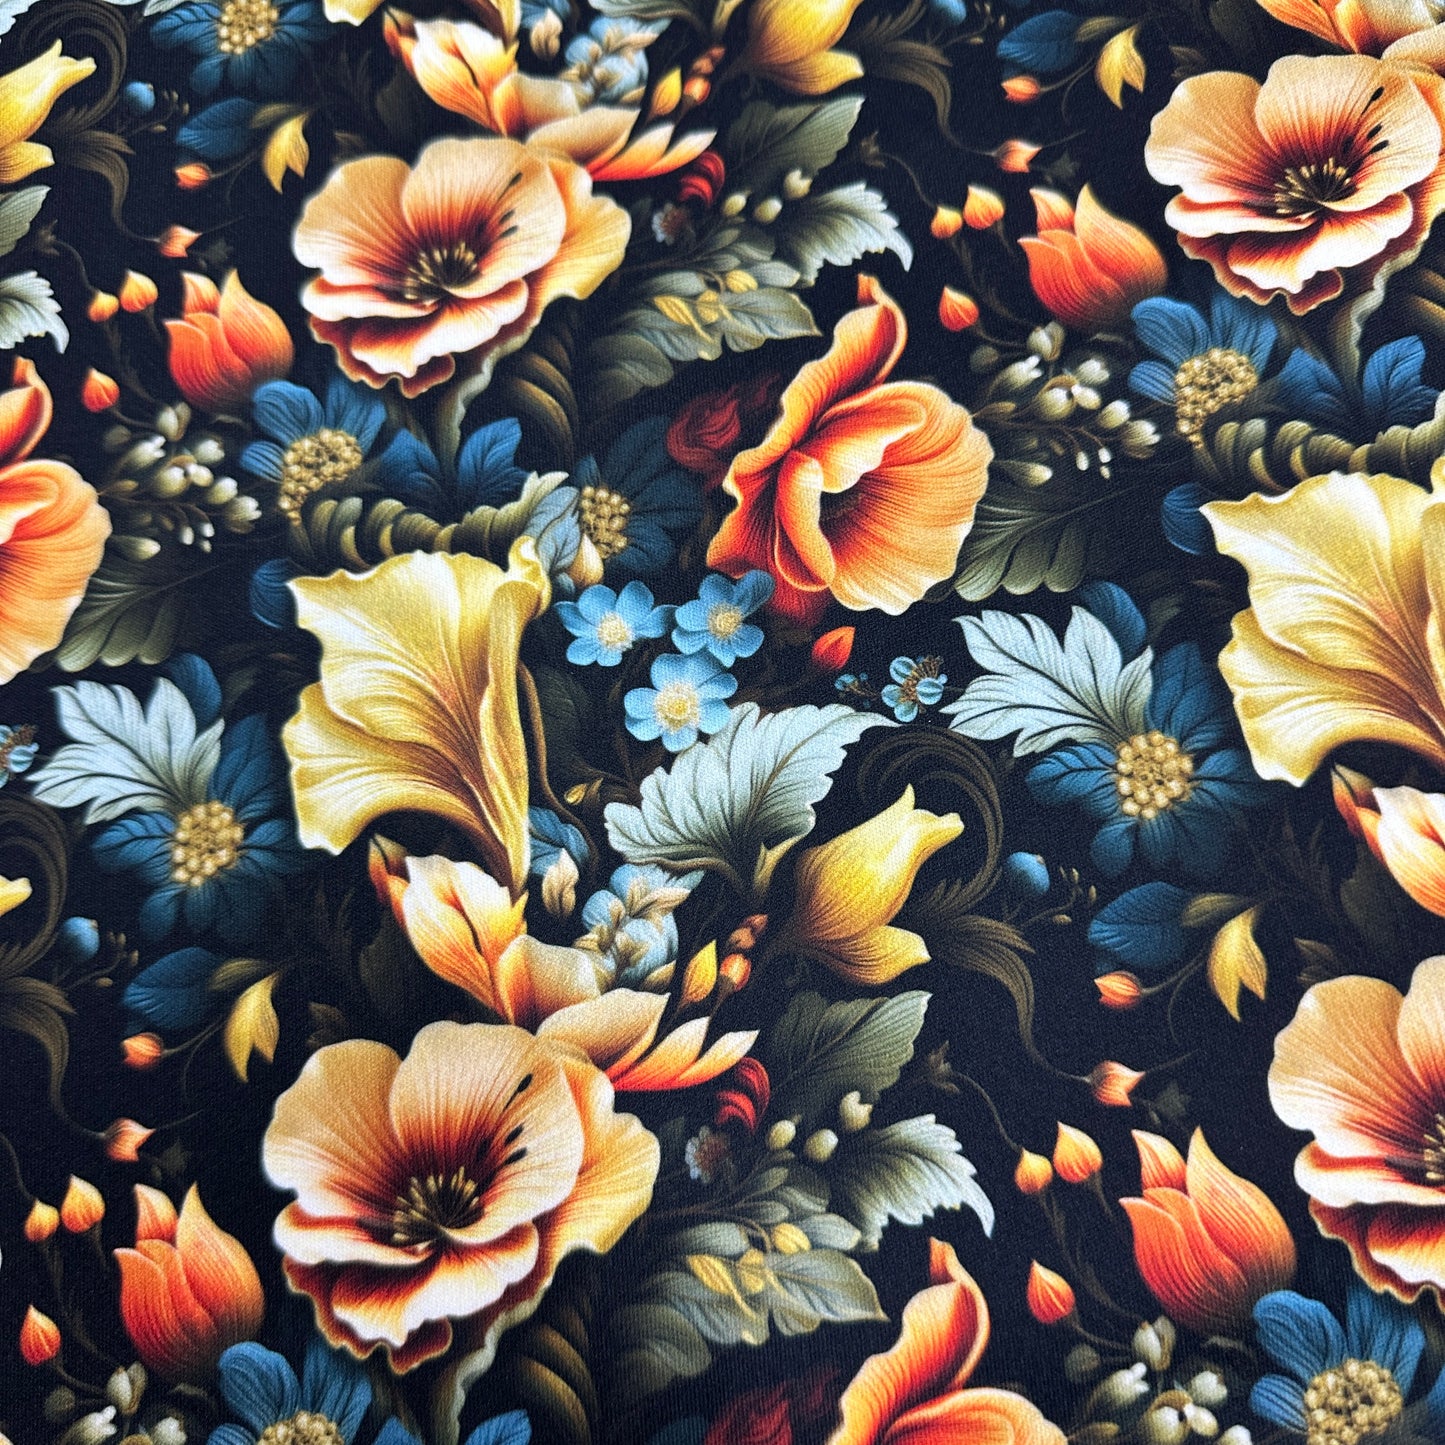 Floral Illustrations 1 mil PUL Fabric - Made in the USA